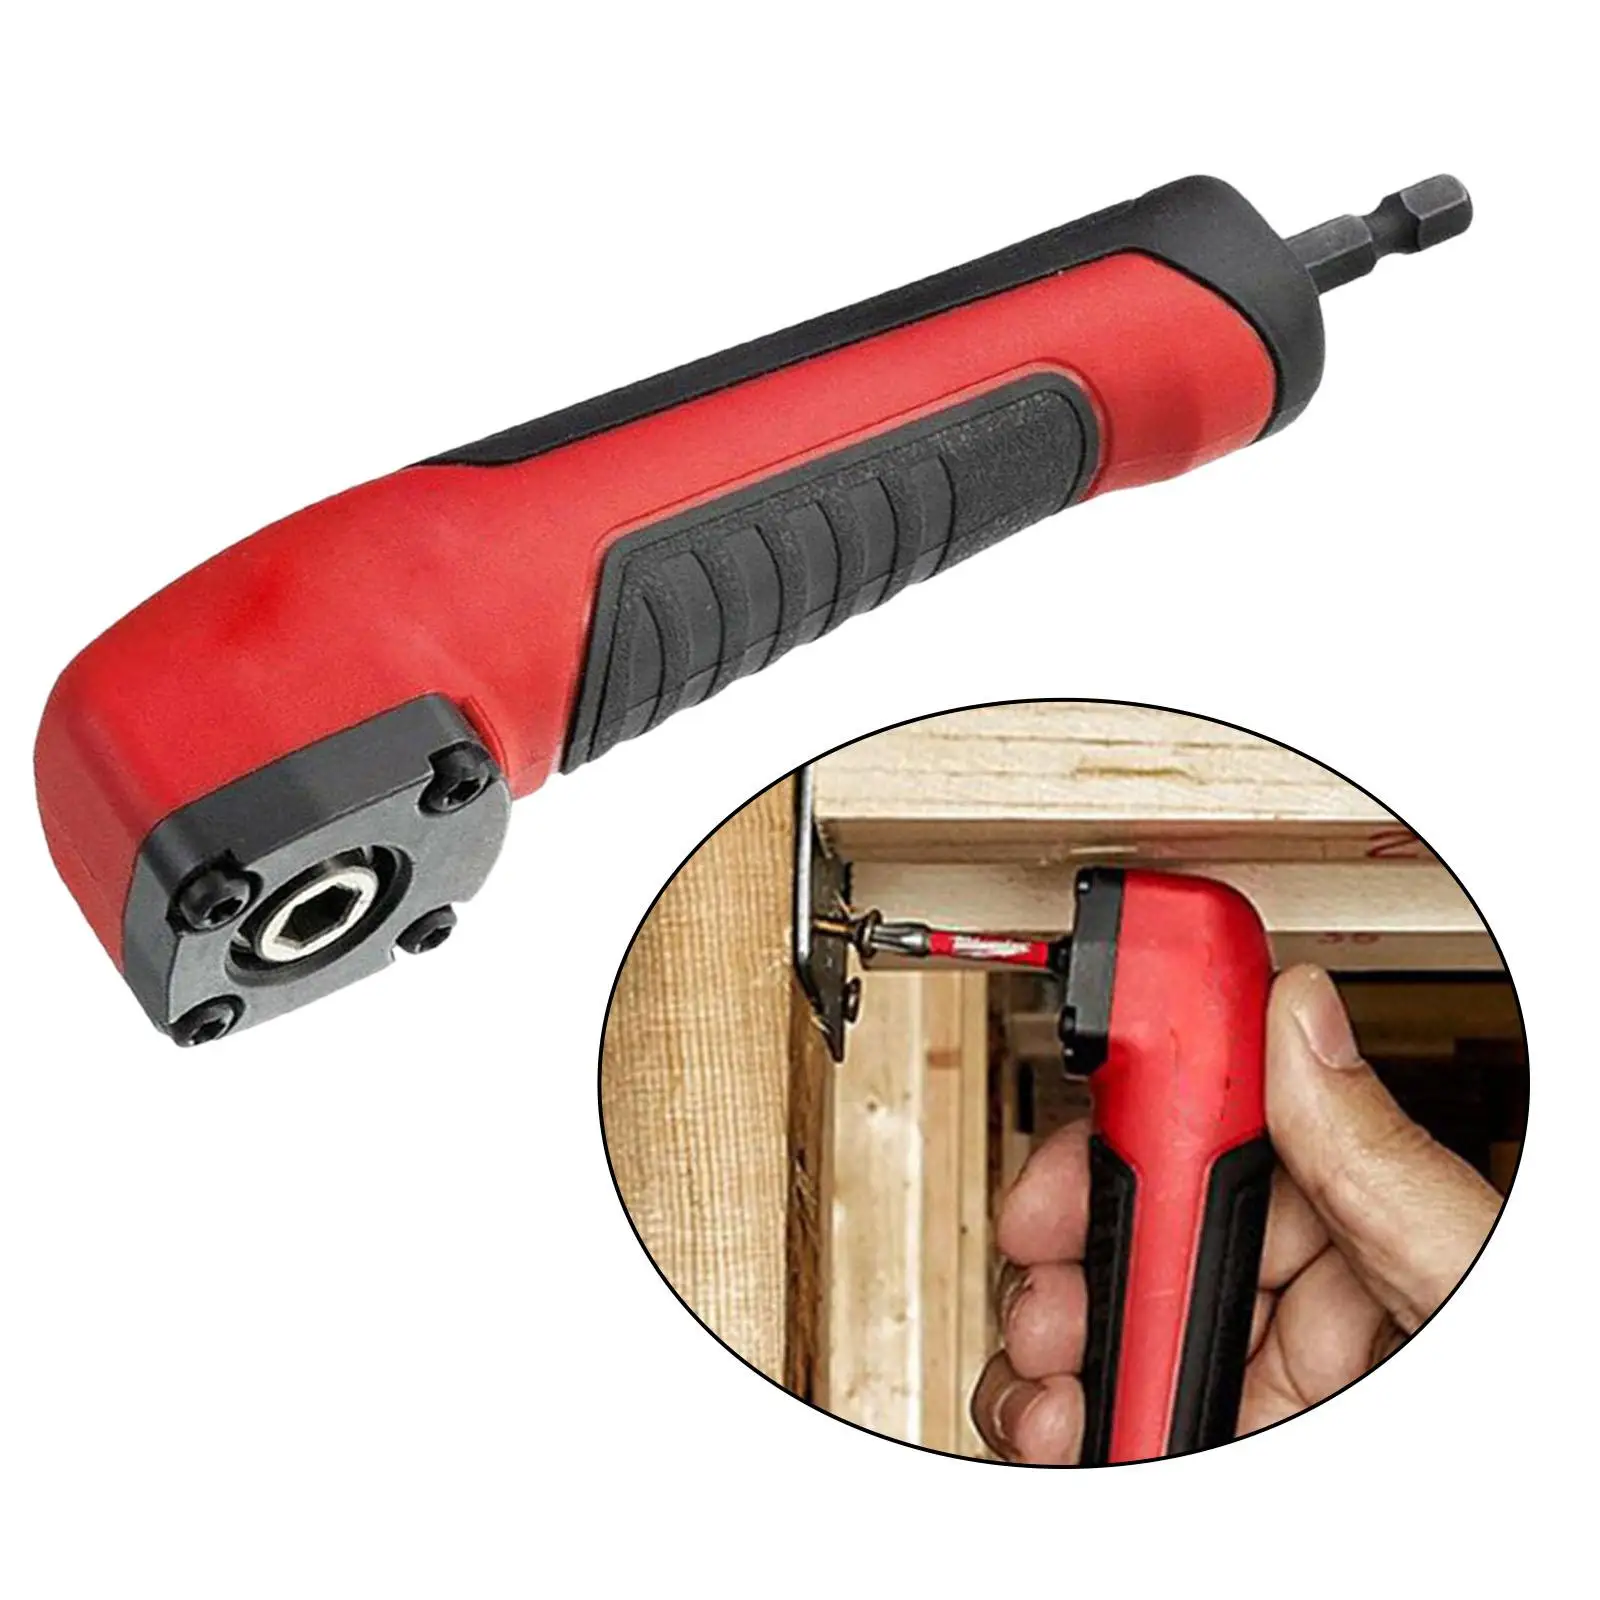 Manual Right Angle Drill Attachment for Electrical Cabinets, Furniture